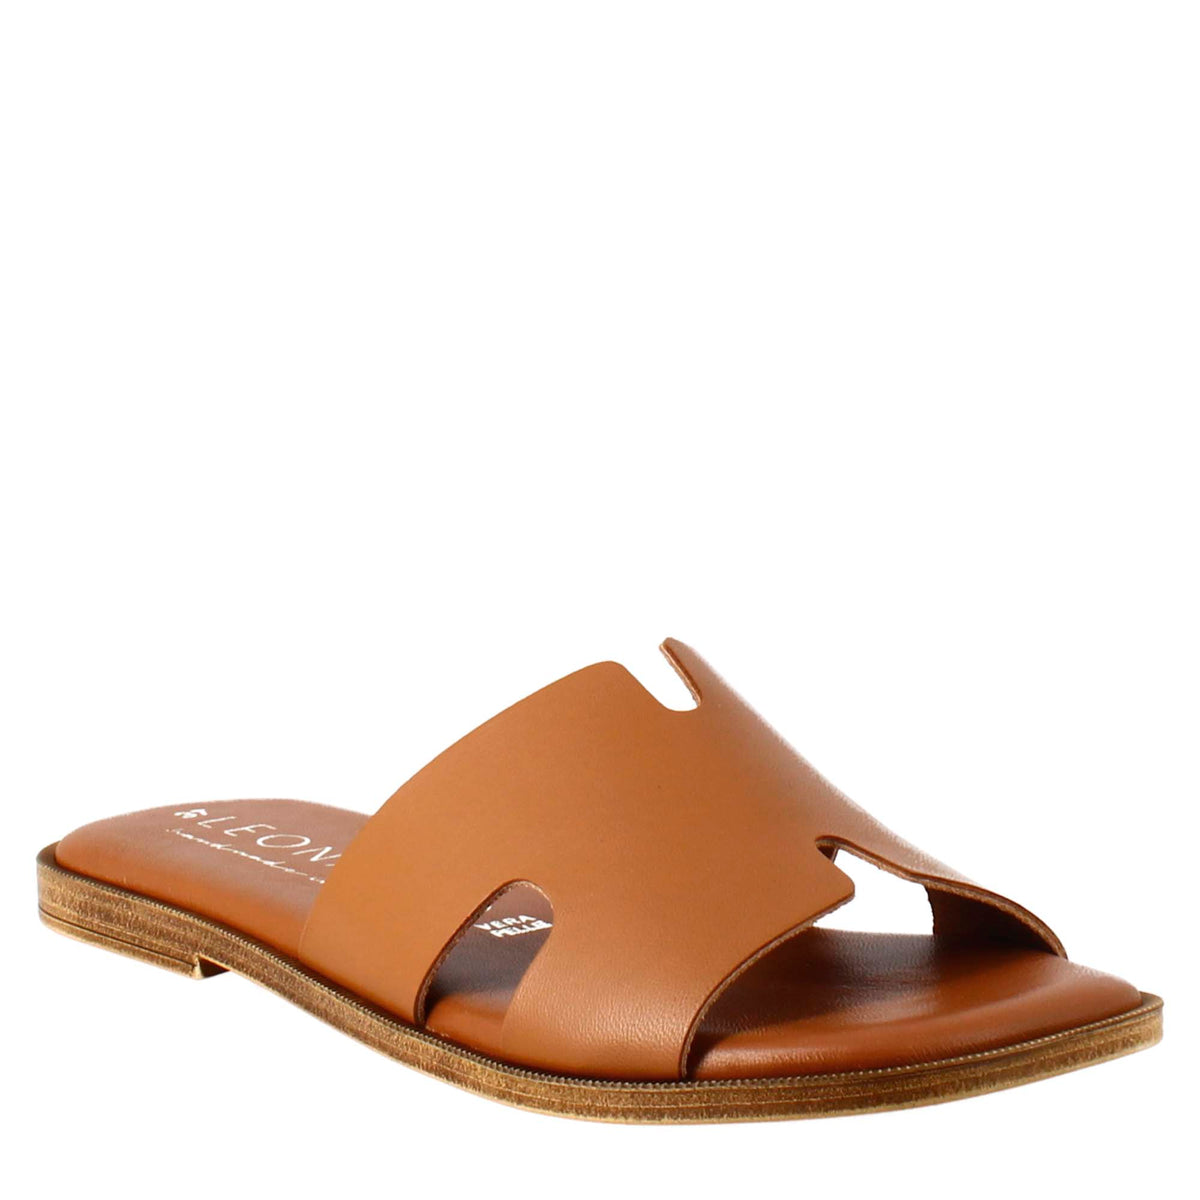 Women's H-shaped sandals in light brown leather